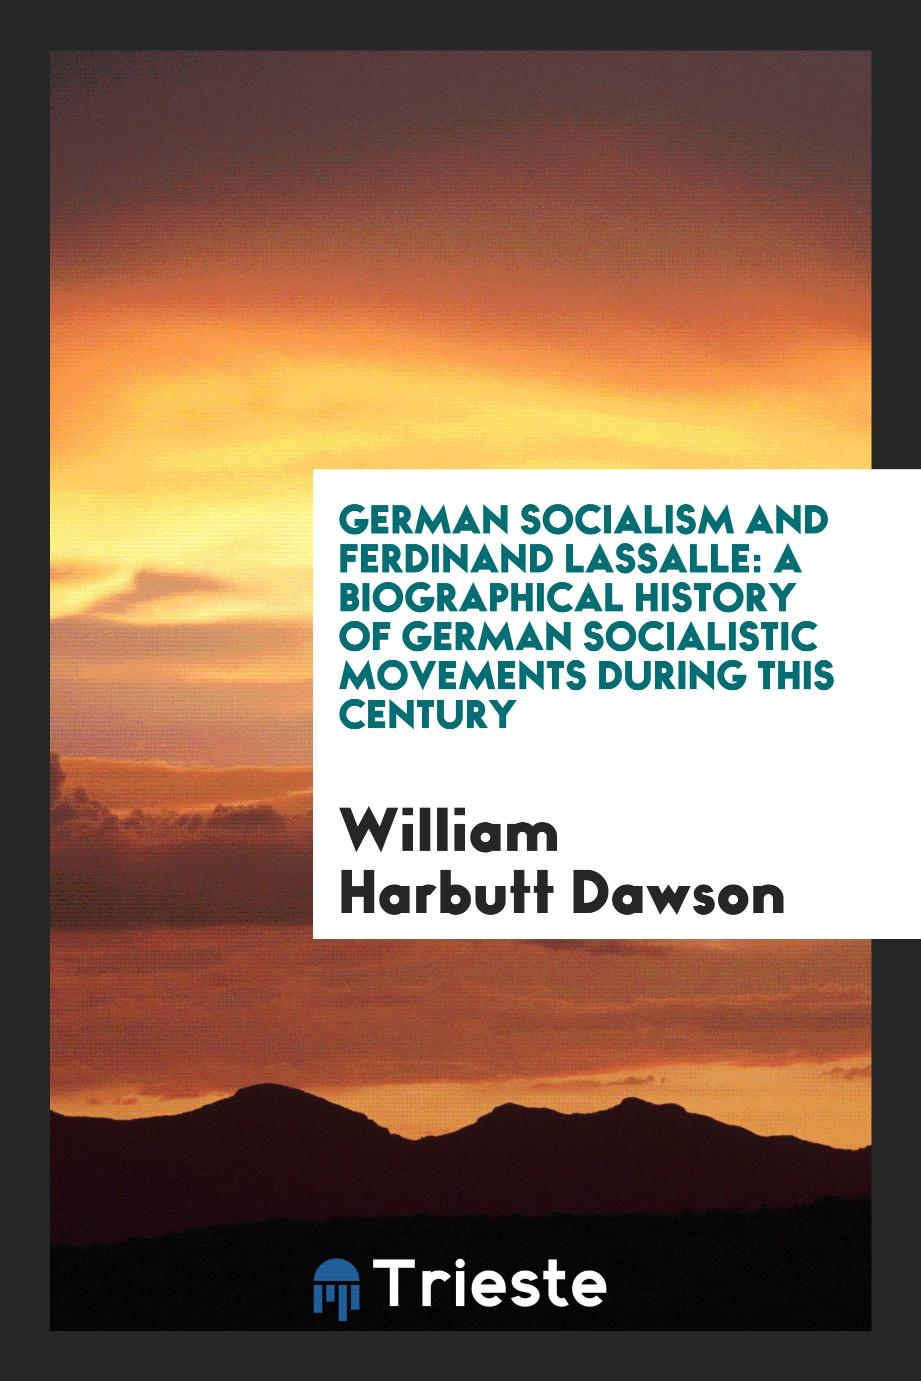 German Socialism and Ferdinand Lassalle: A Biographical History of German Socialistic Movements During This Century